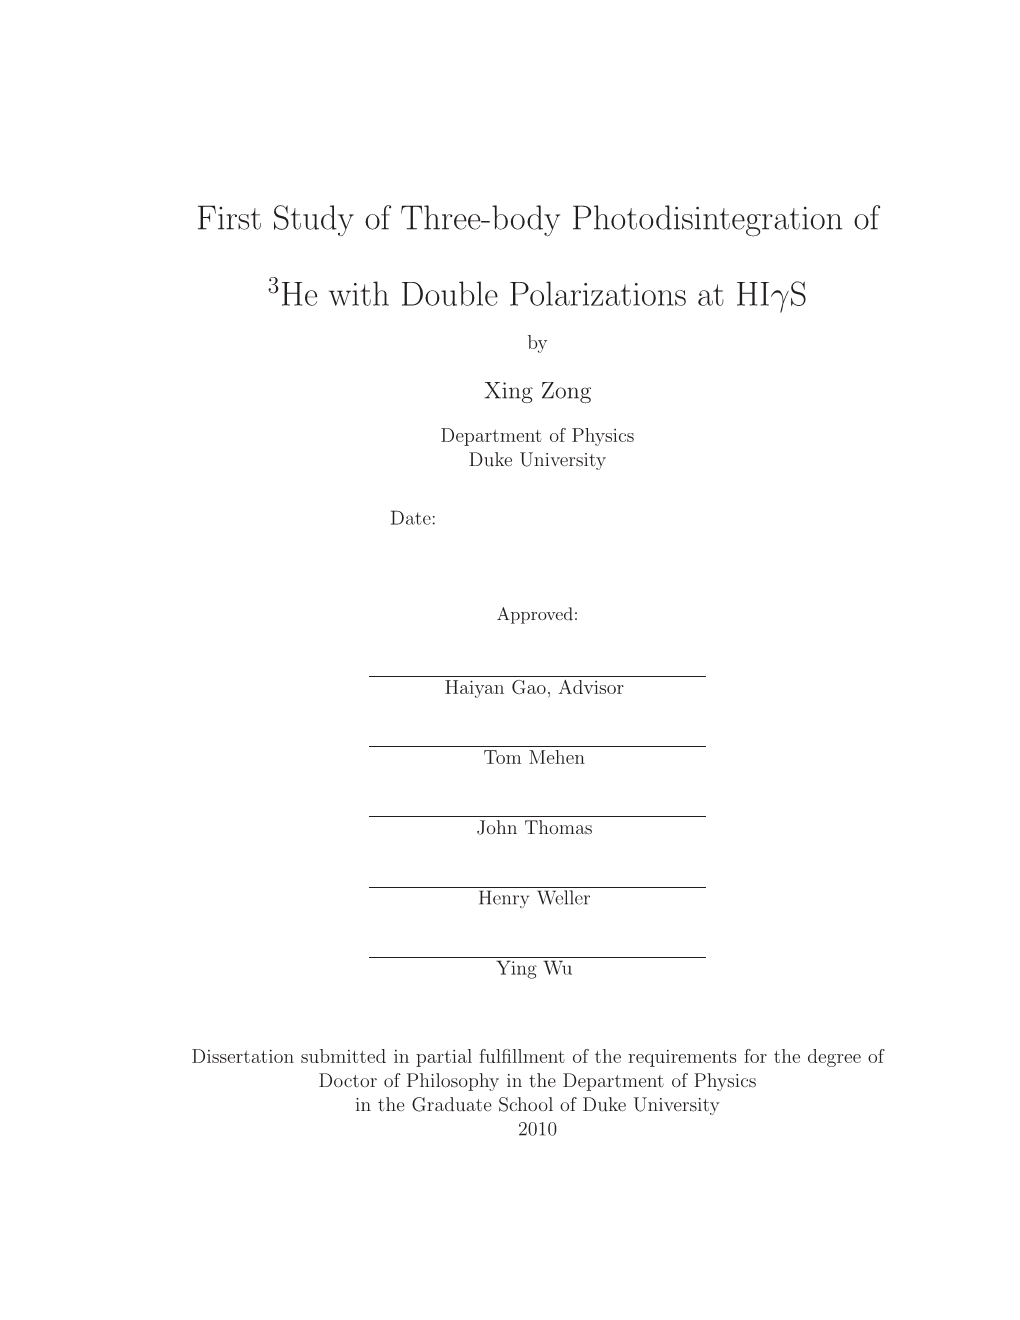 First Study of Three-Body Photodisintegration of He With